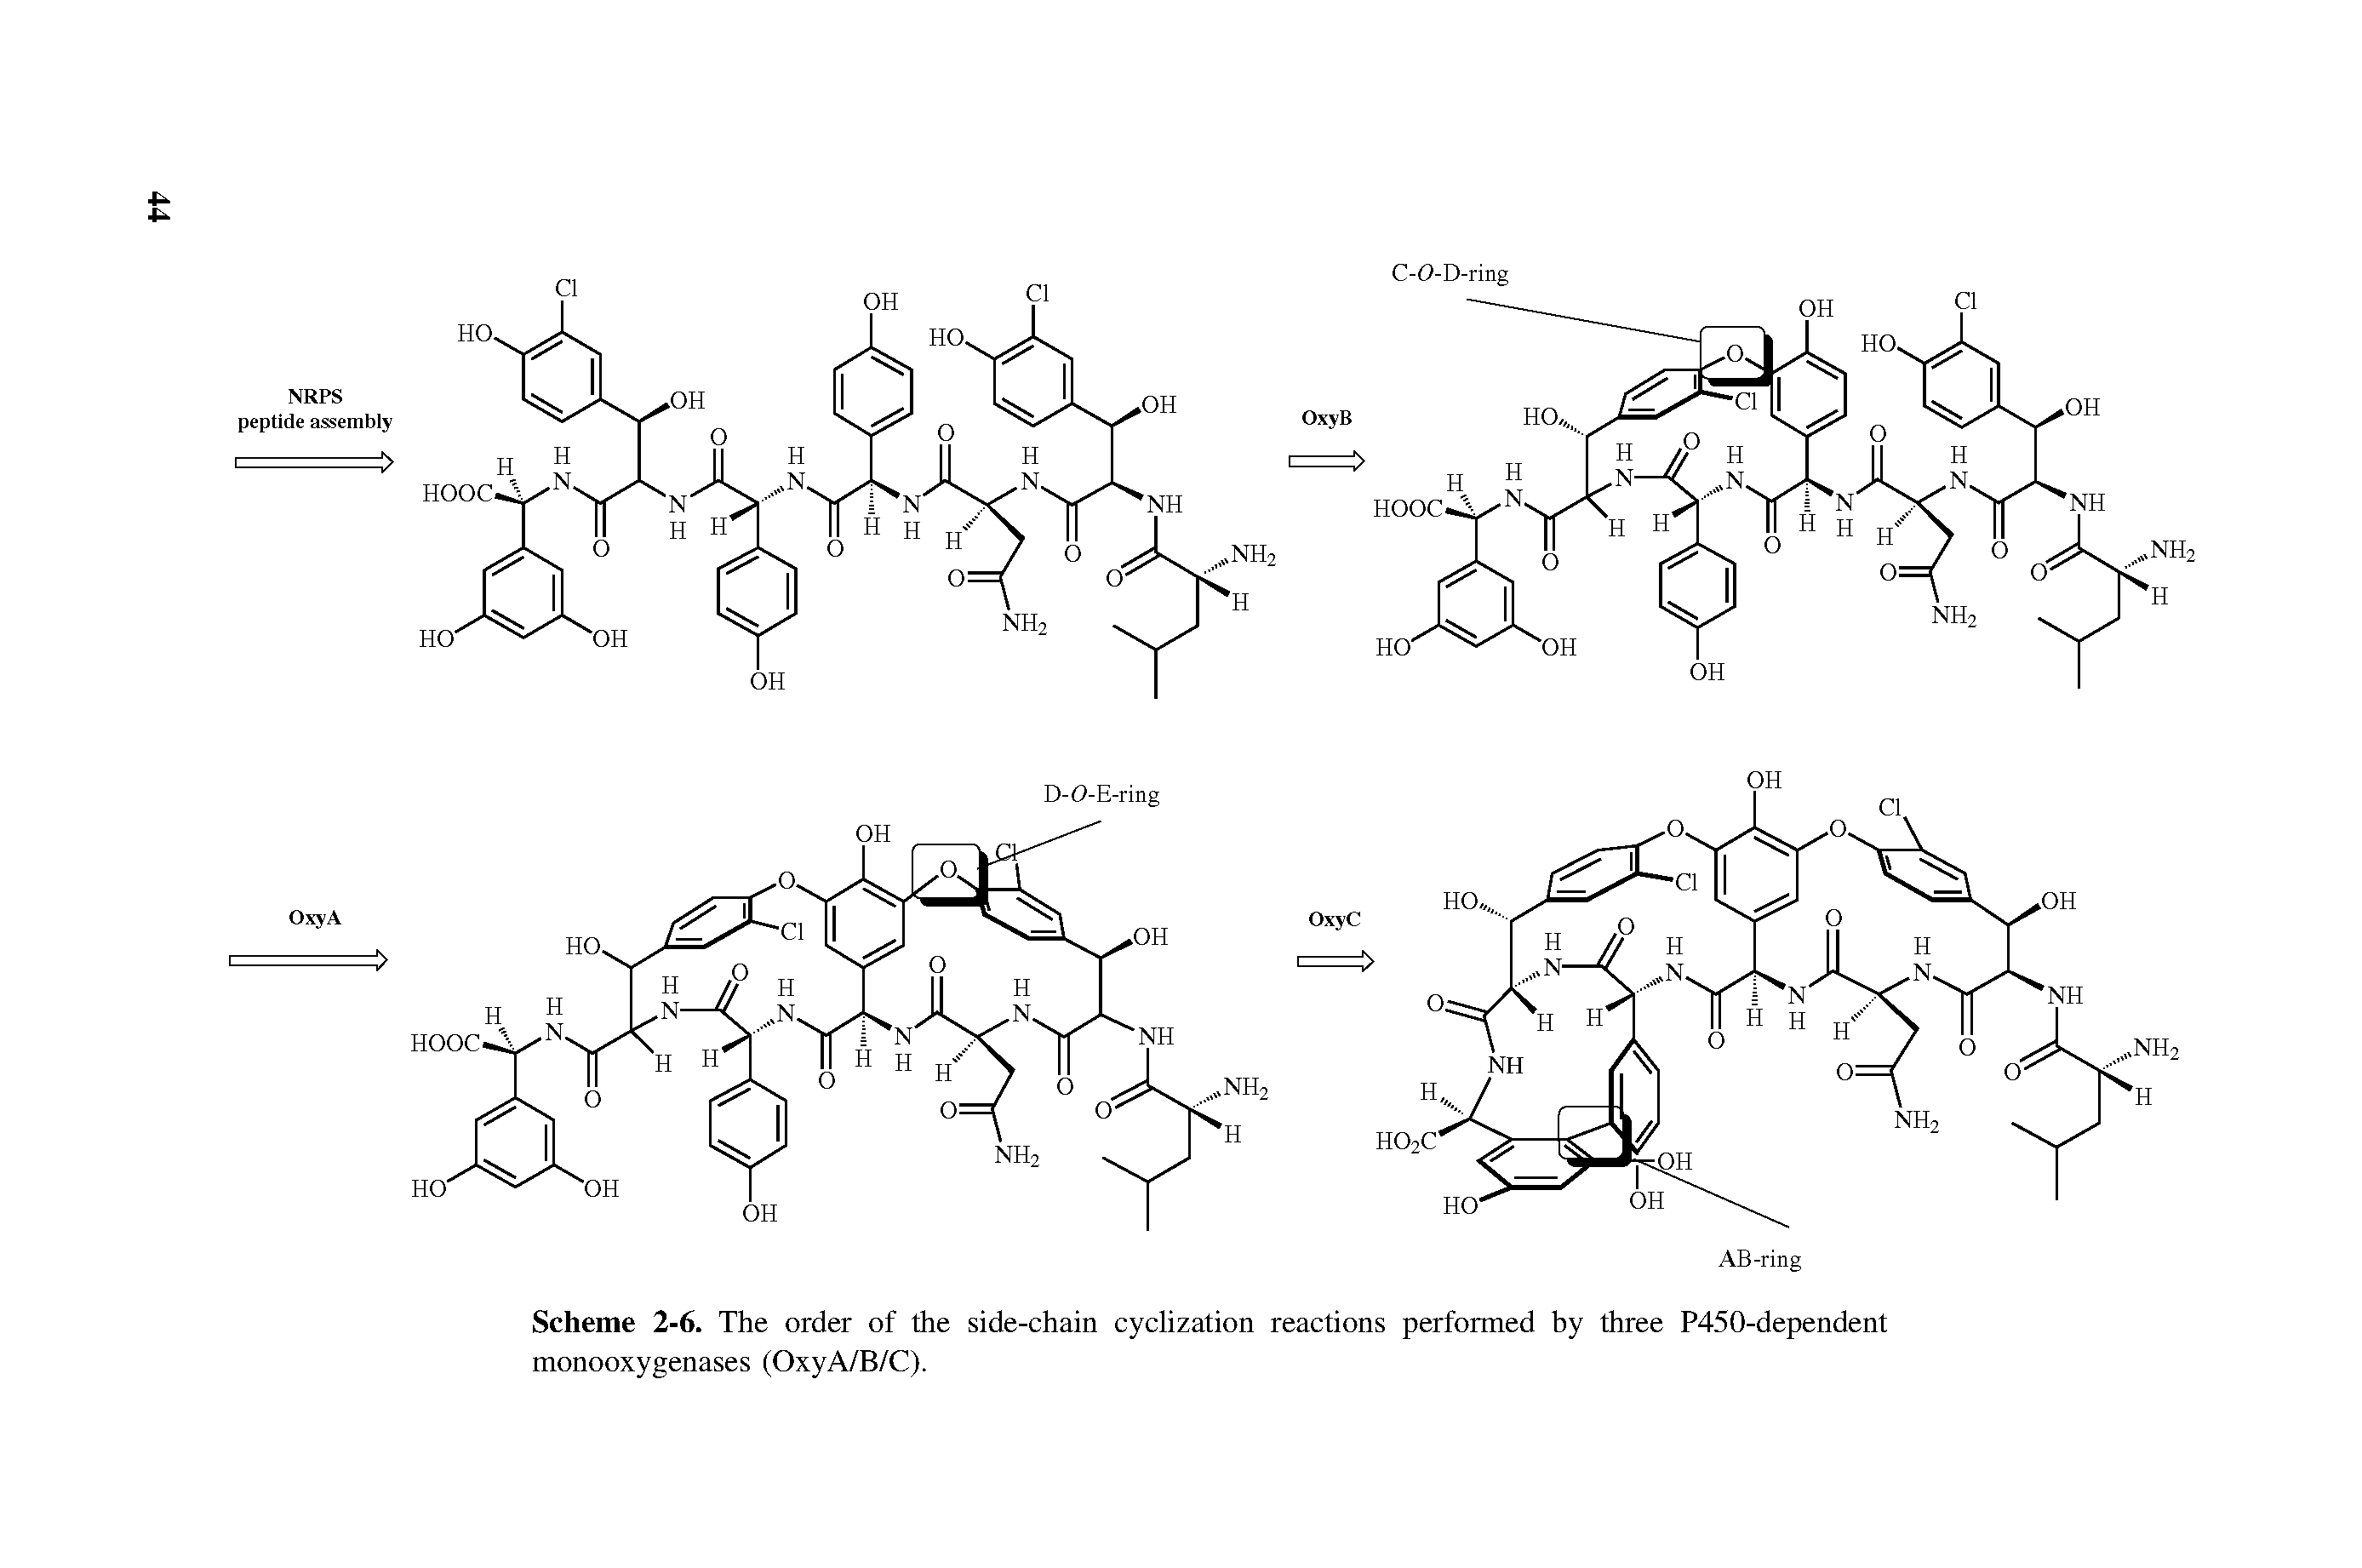 Scheme 2-6. The order of the side-chain cyclization reactions performed by three P450-dependent monooxygenases (OxyA/B/C).